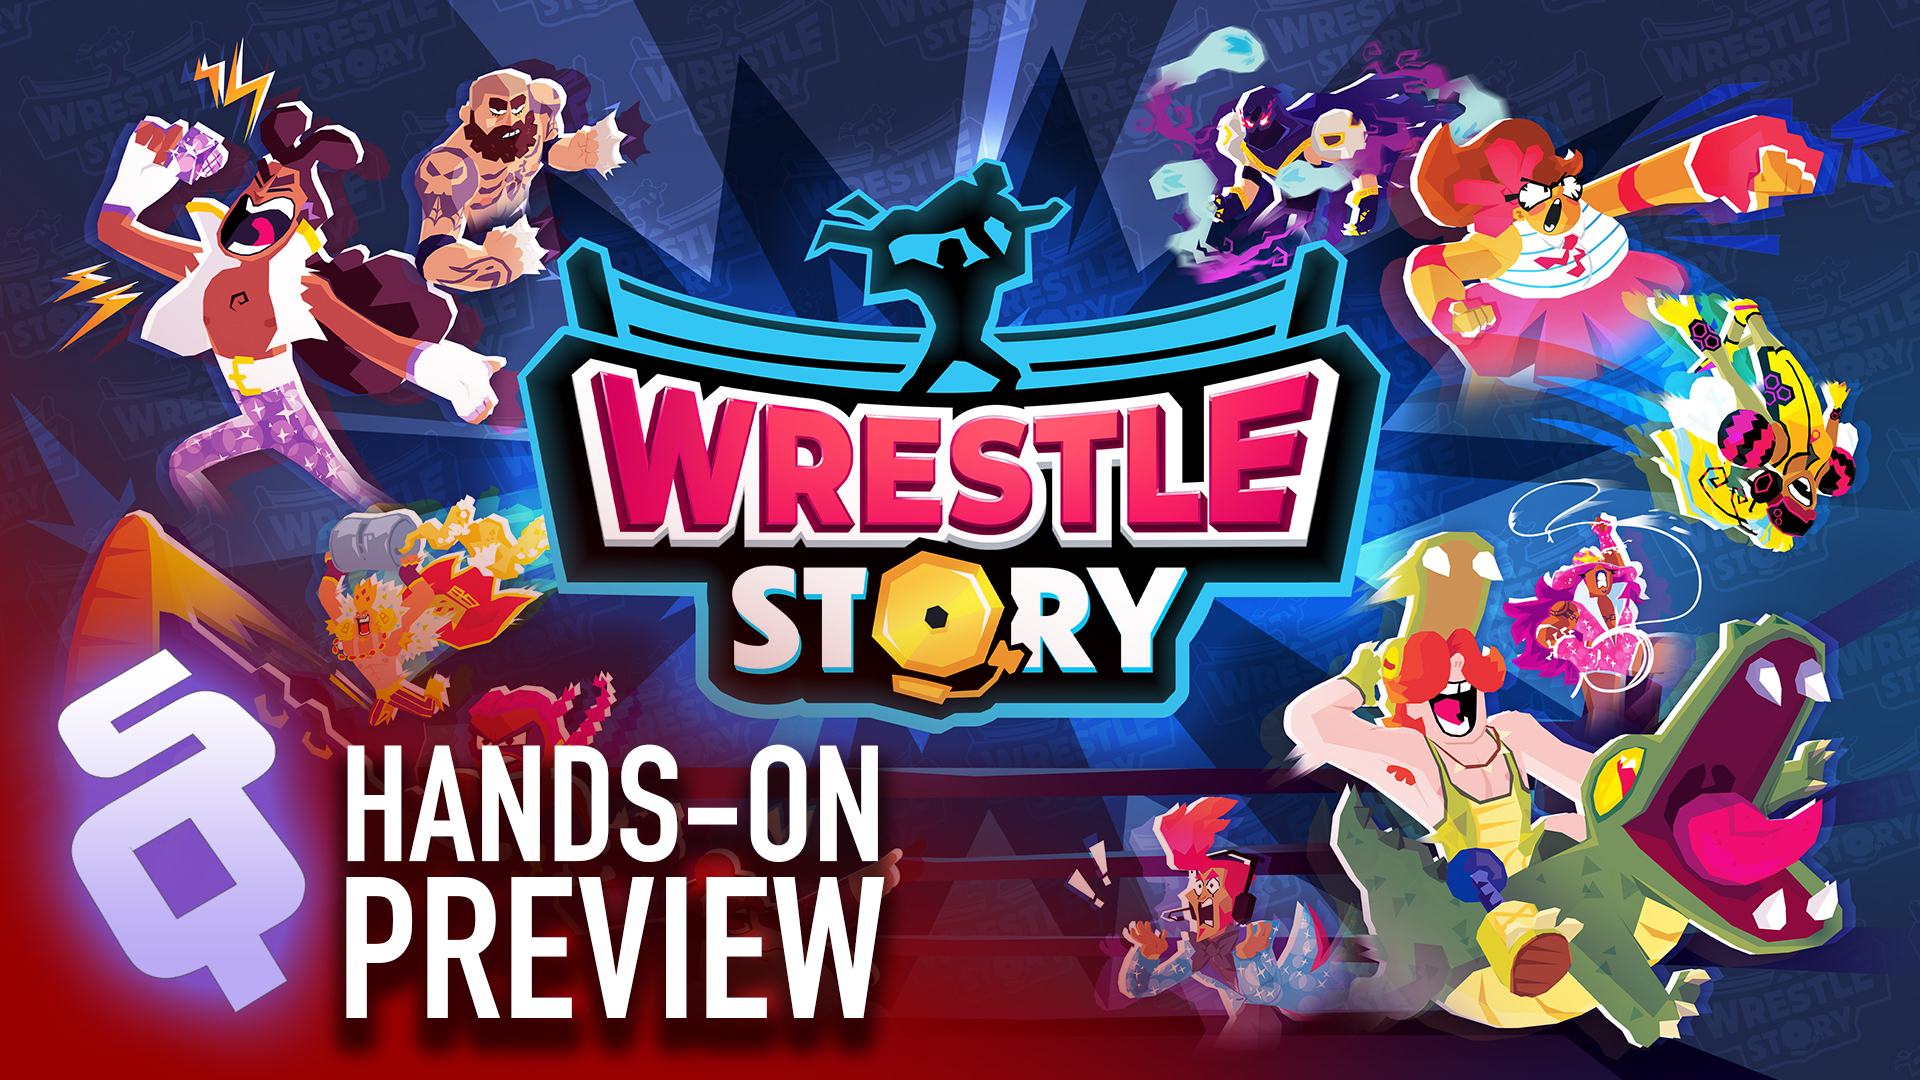 Wrestle Story hands-on preview